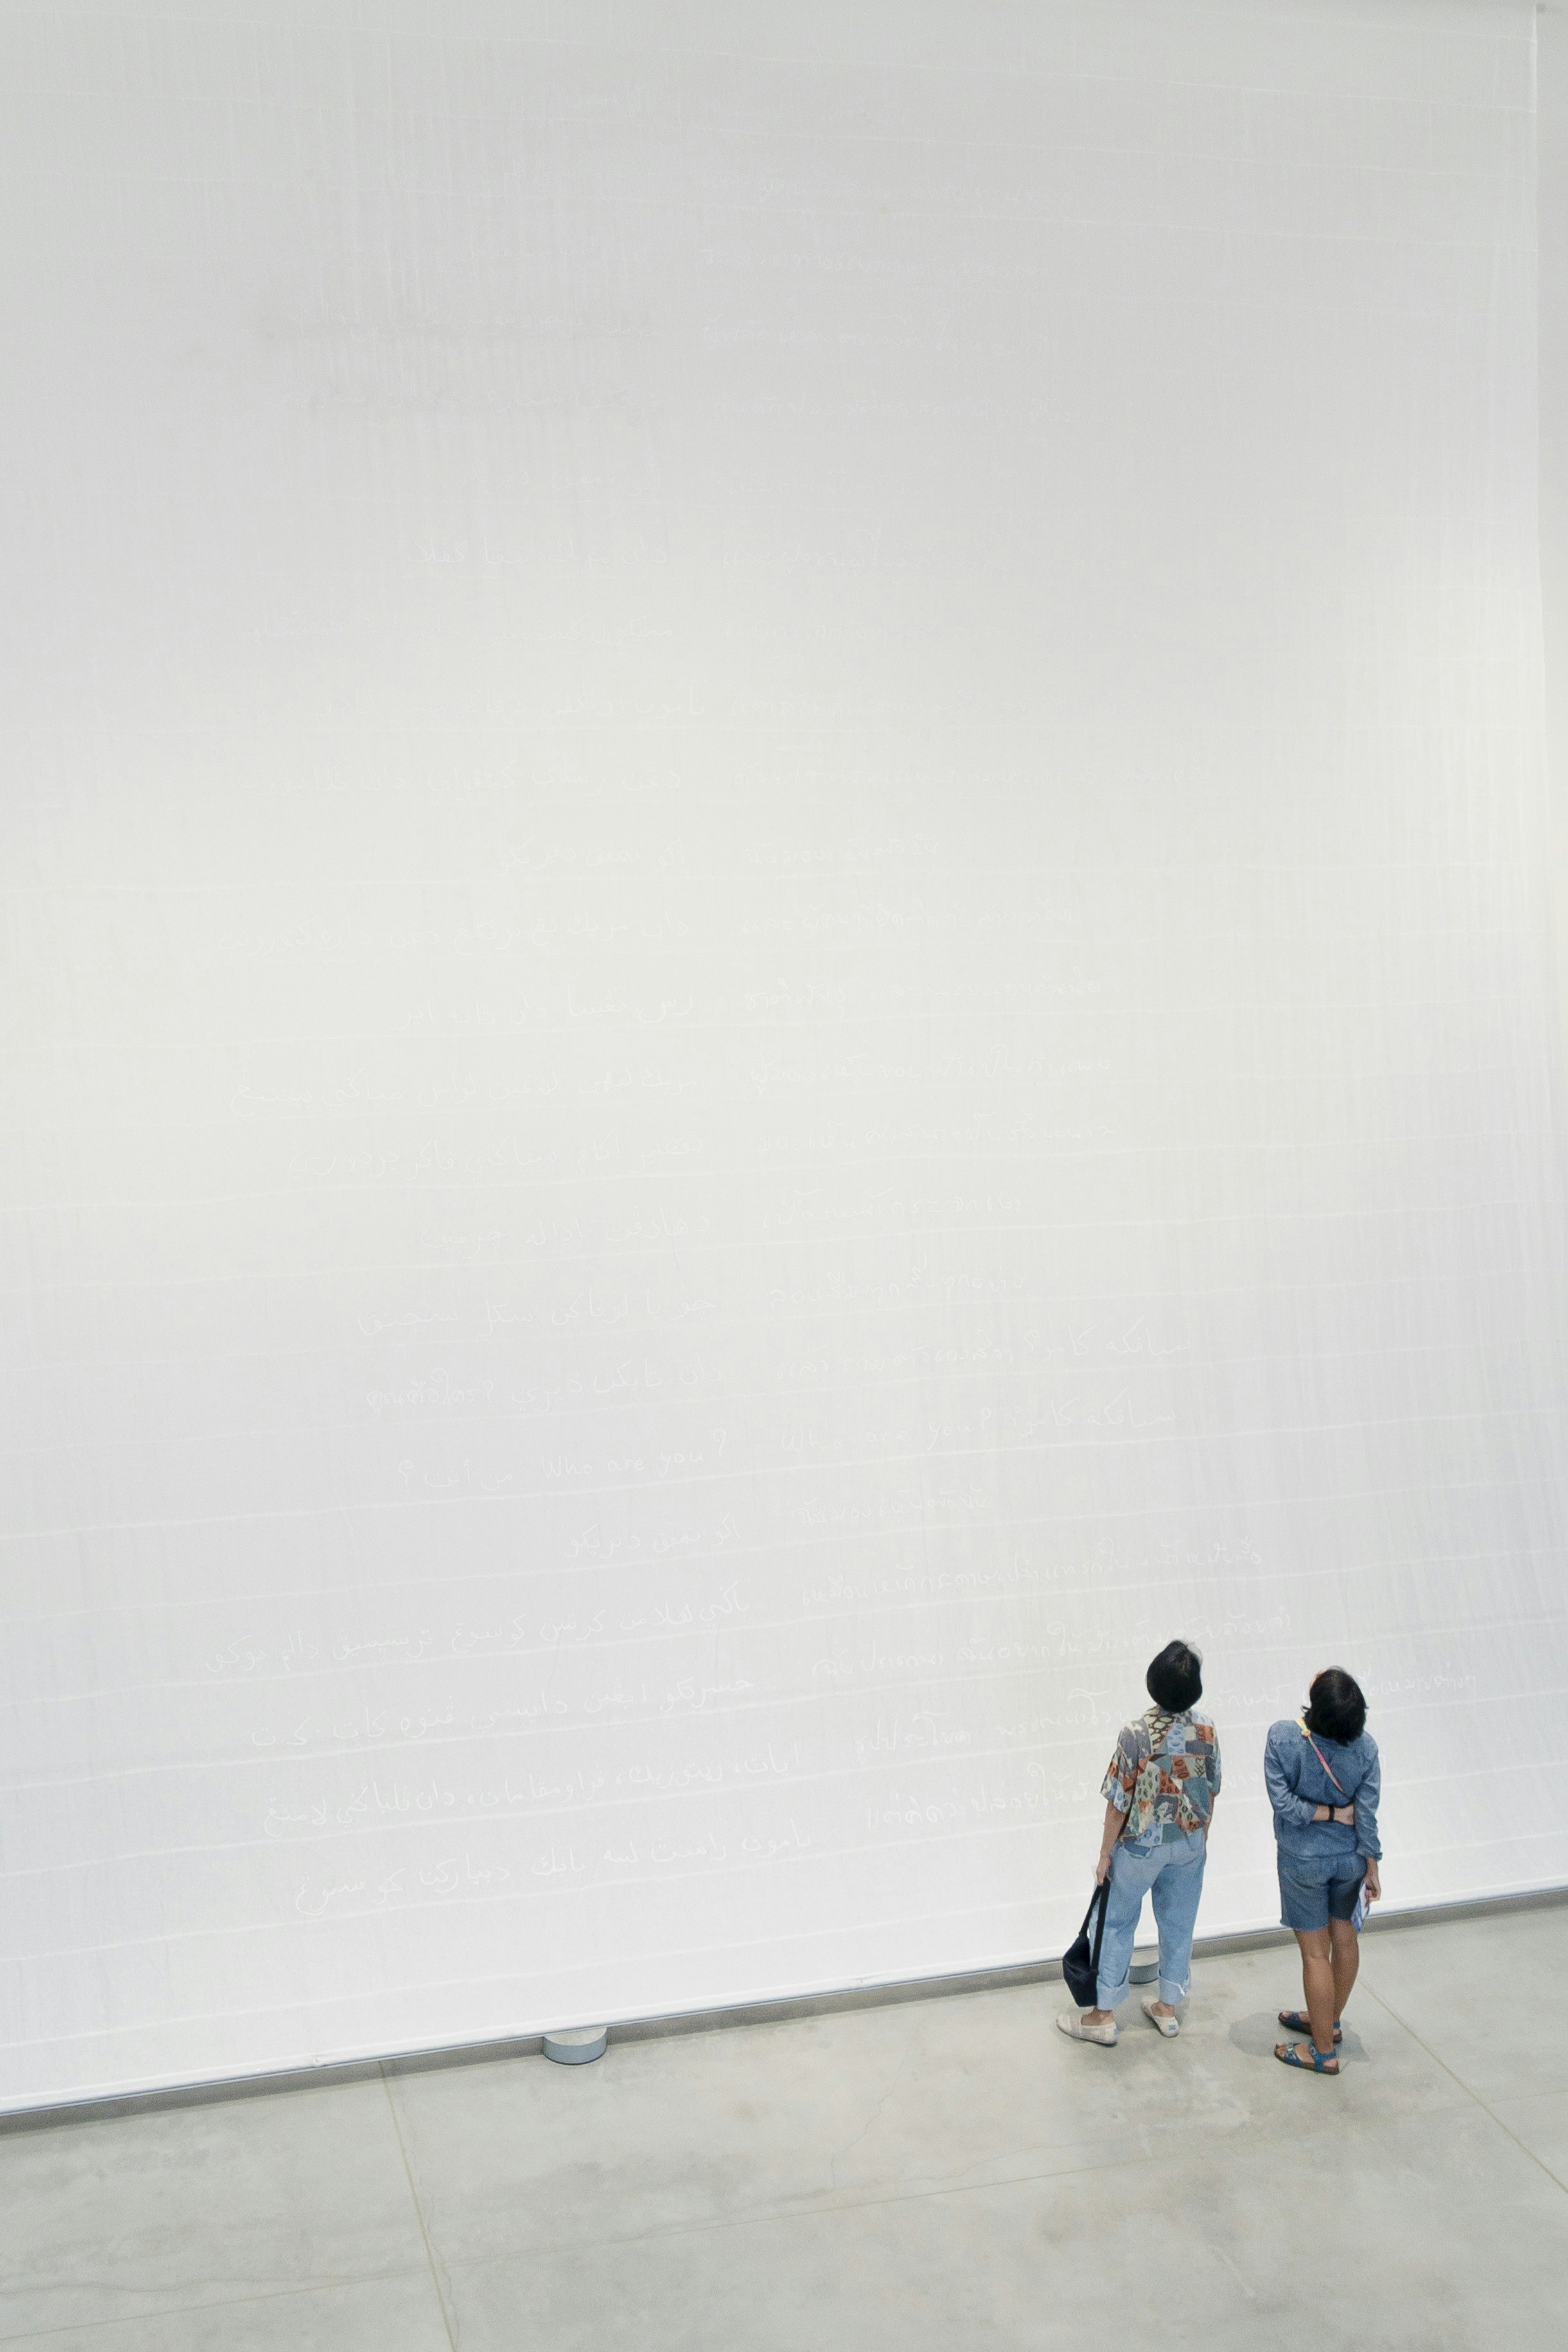 3-men-and-2-women-standing-on-white-wall